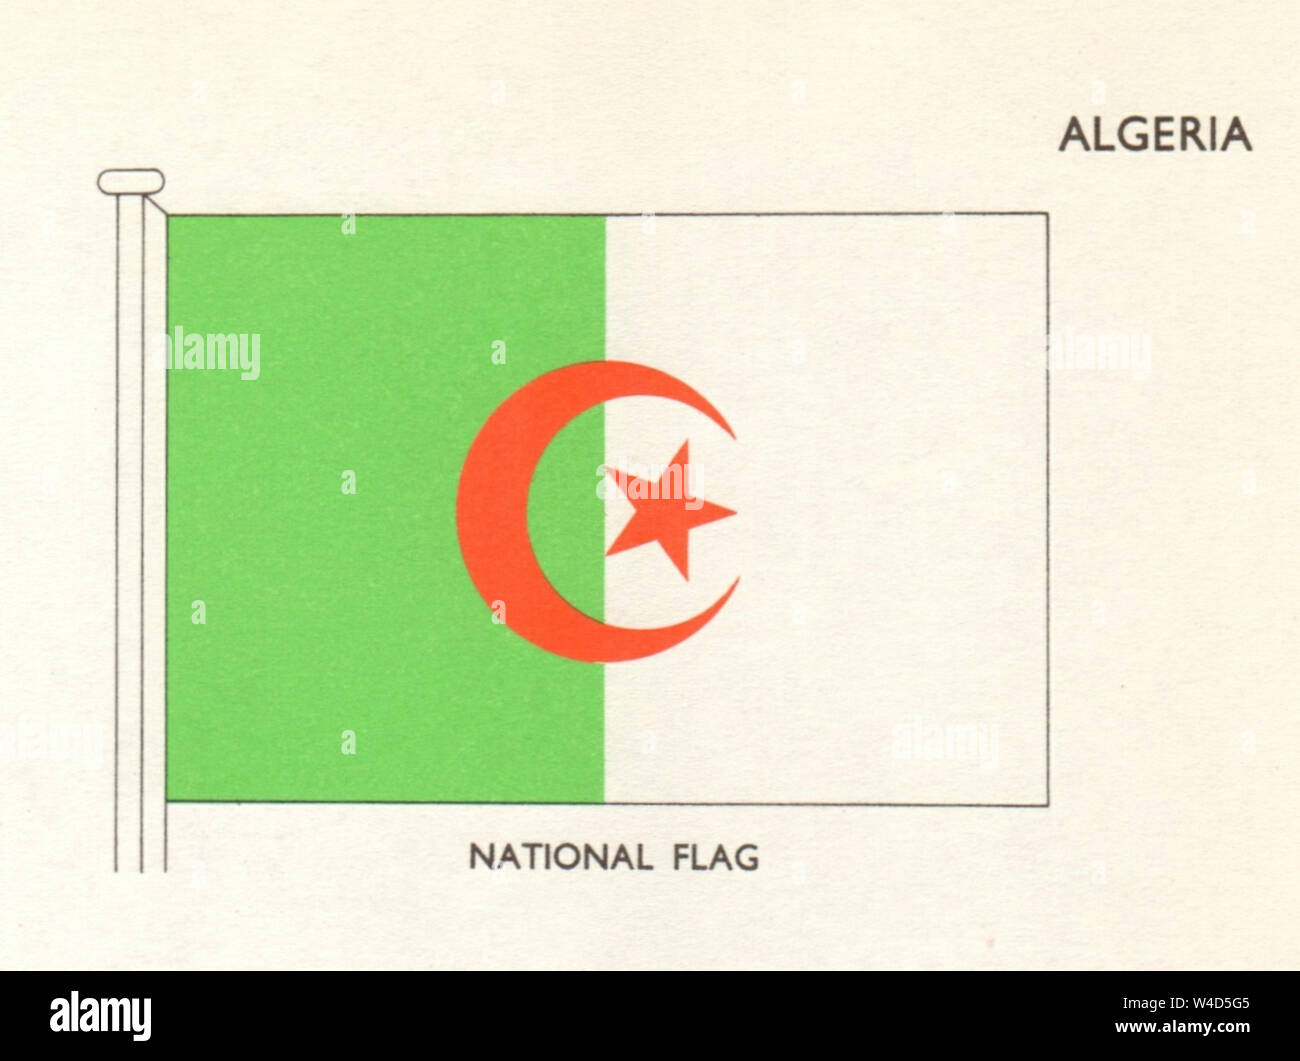 ALGERIA FLAGS. National Flag 1965 old vintage print picture Stock Photo